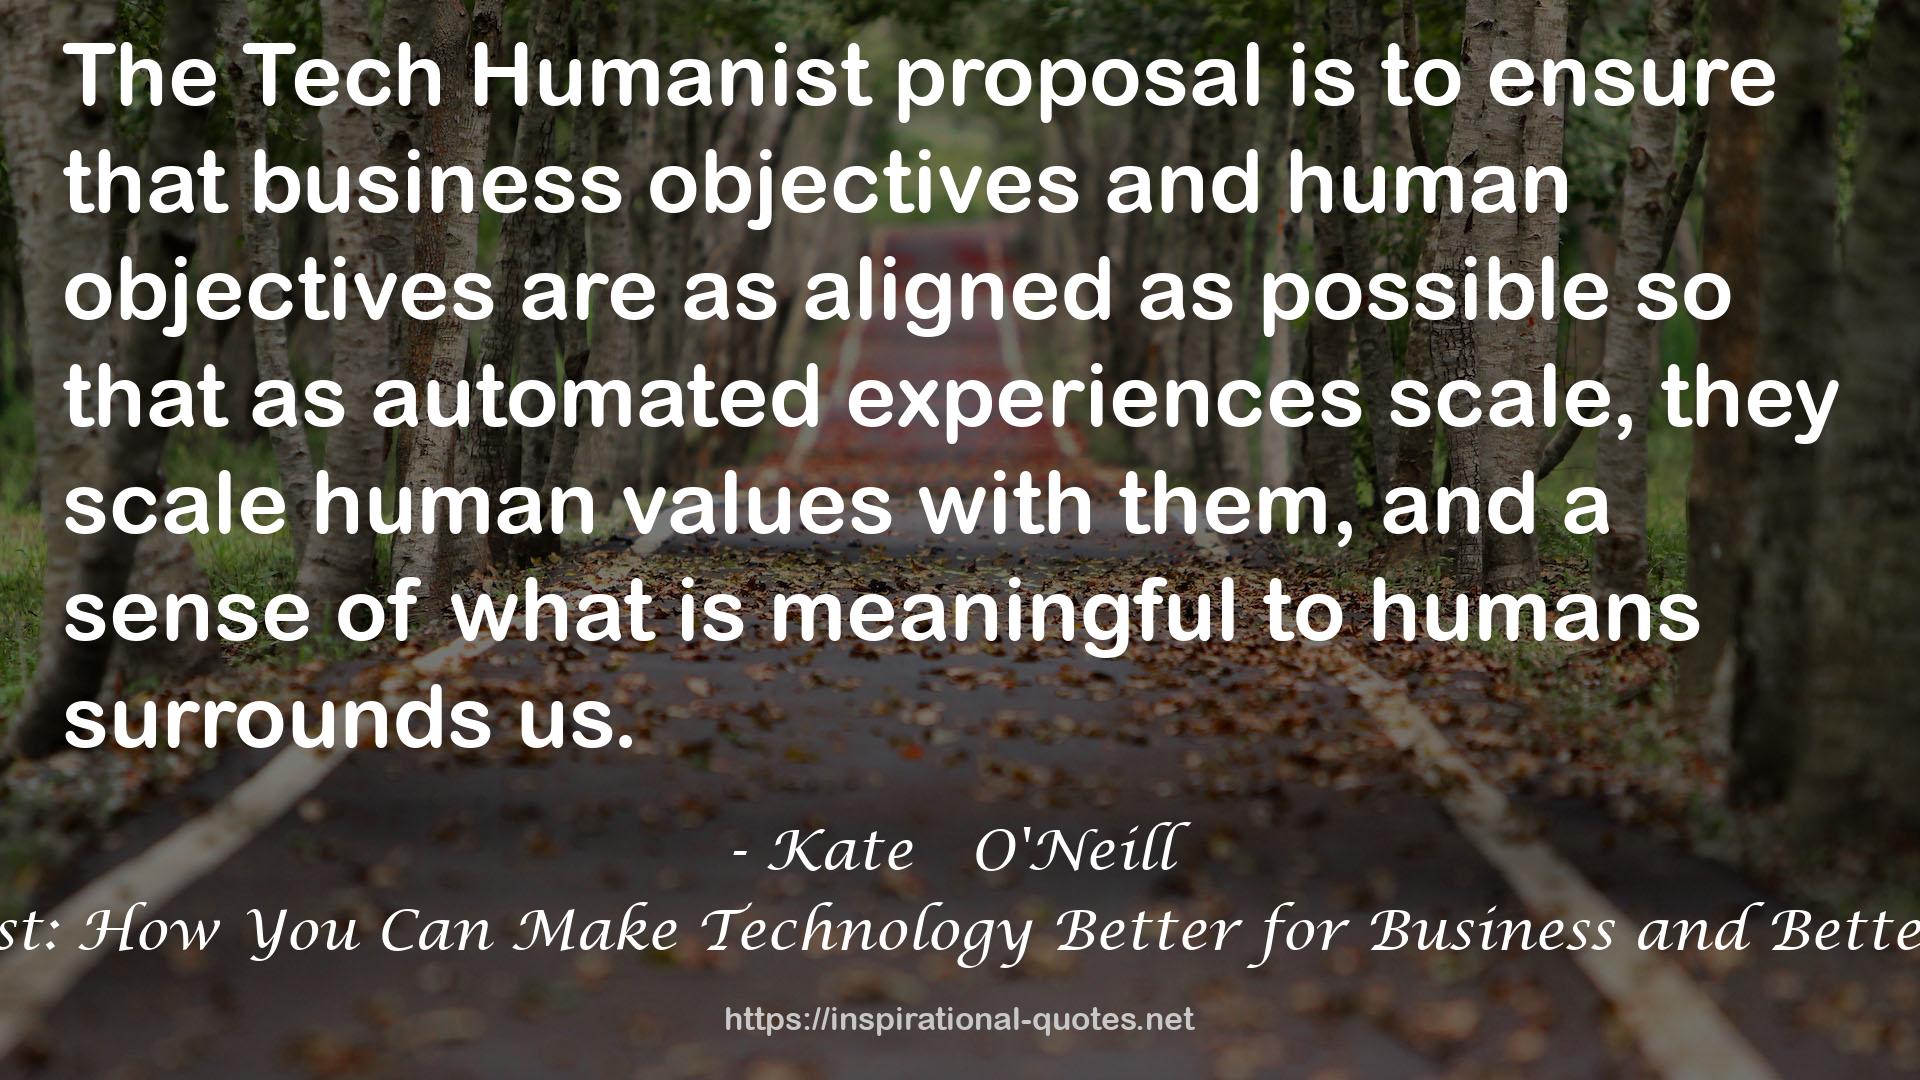 Tech Humanist: How You Can Make Technology Better for Business and Better for Humans QUOTES